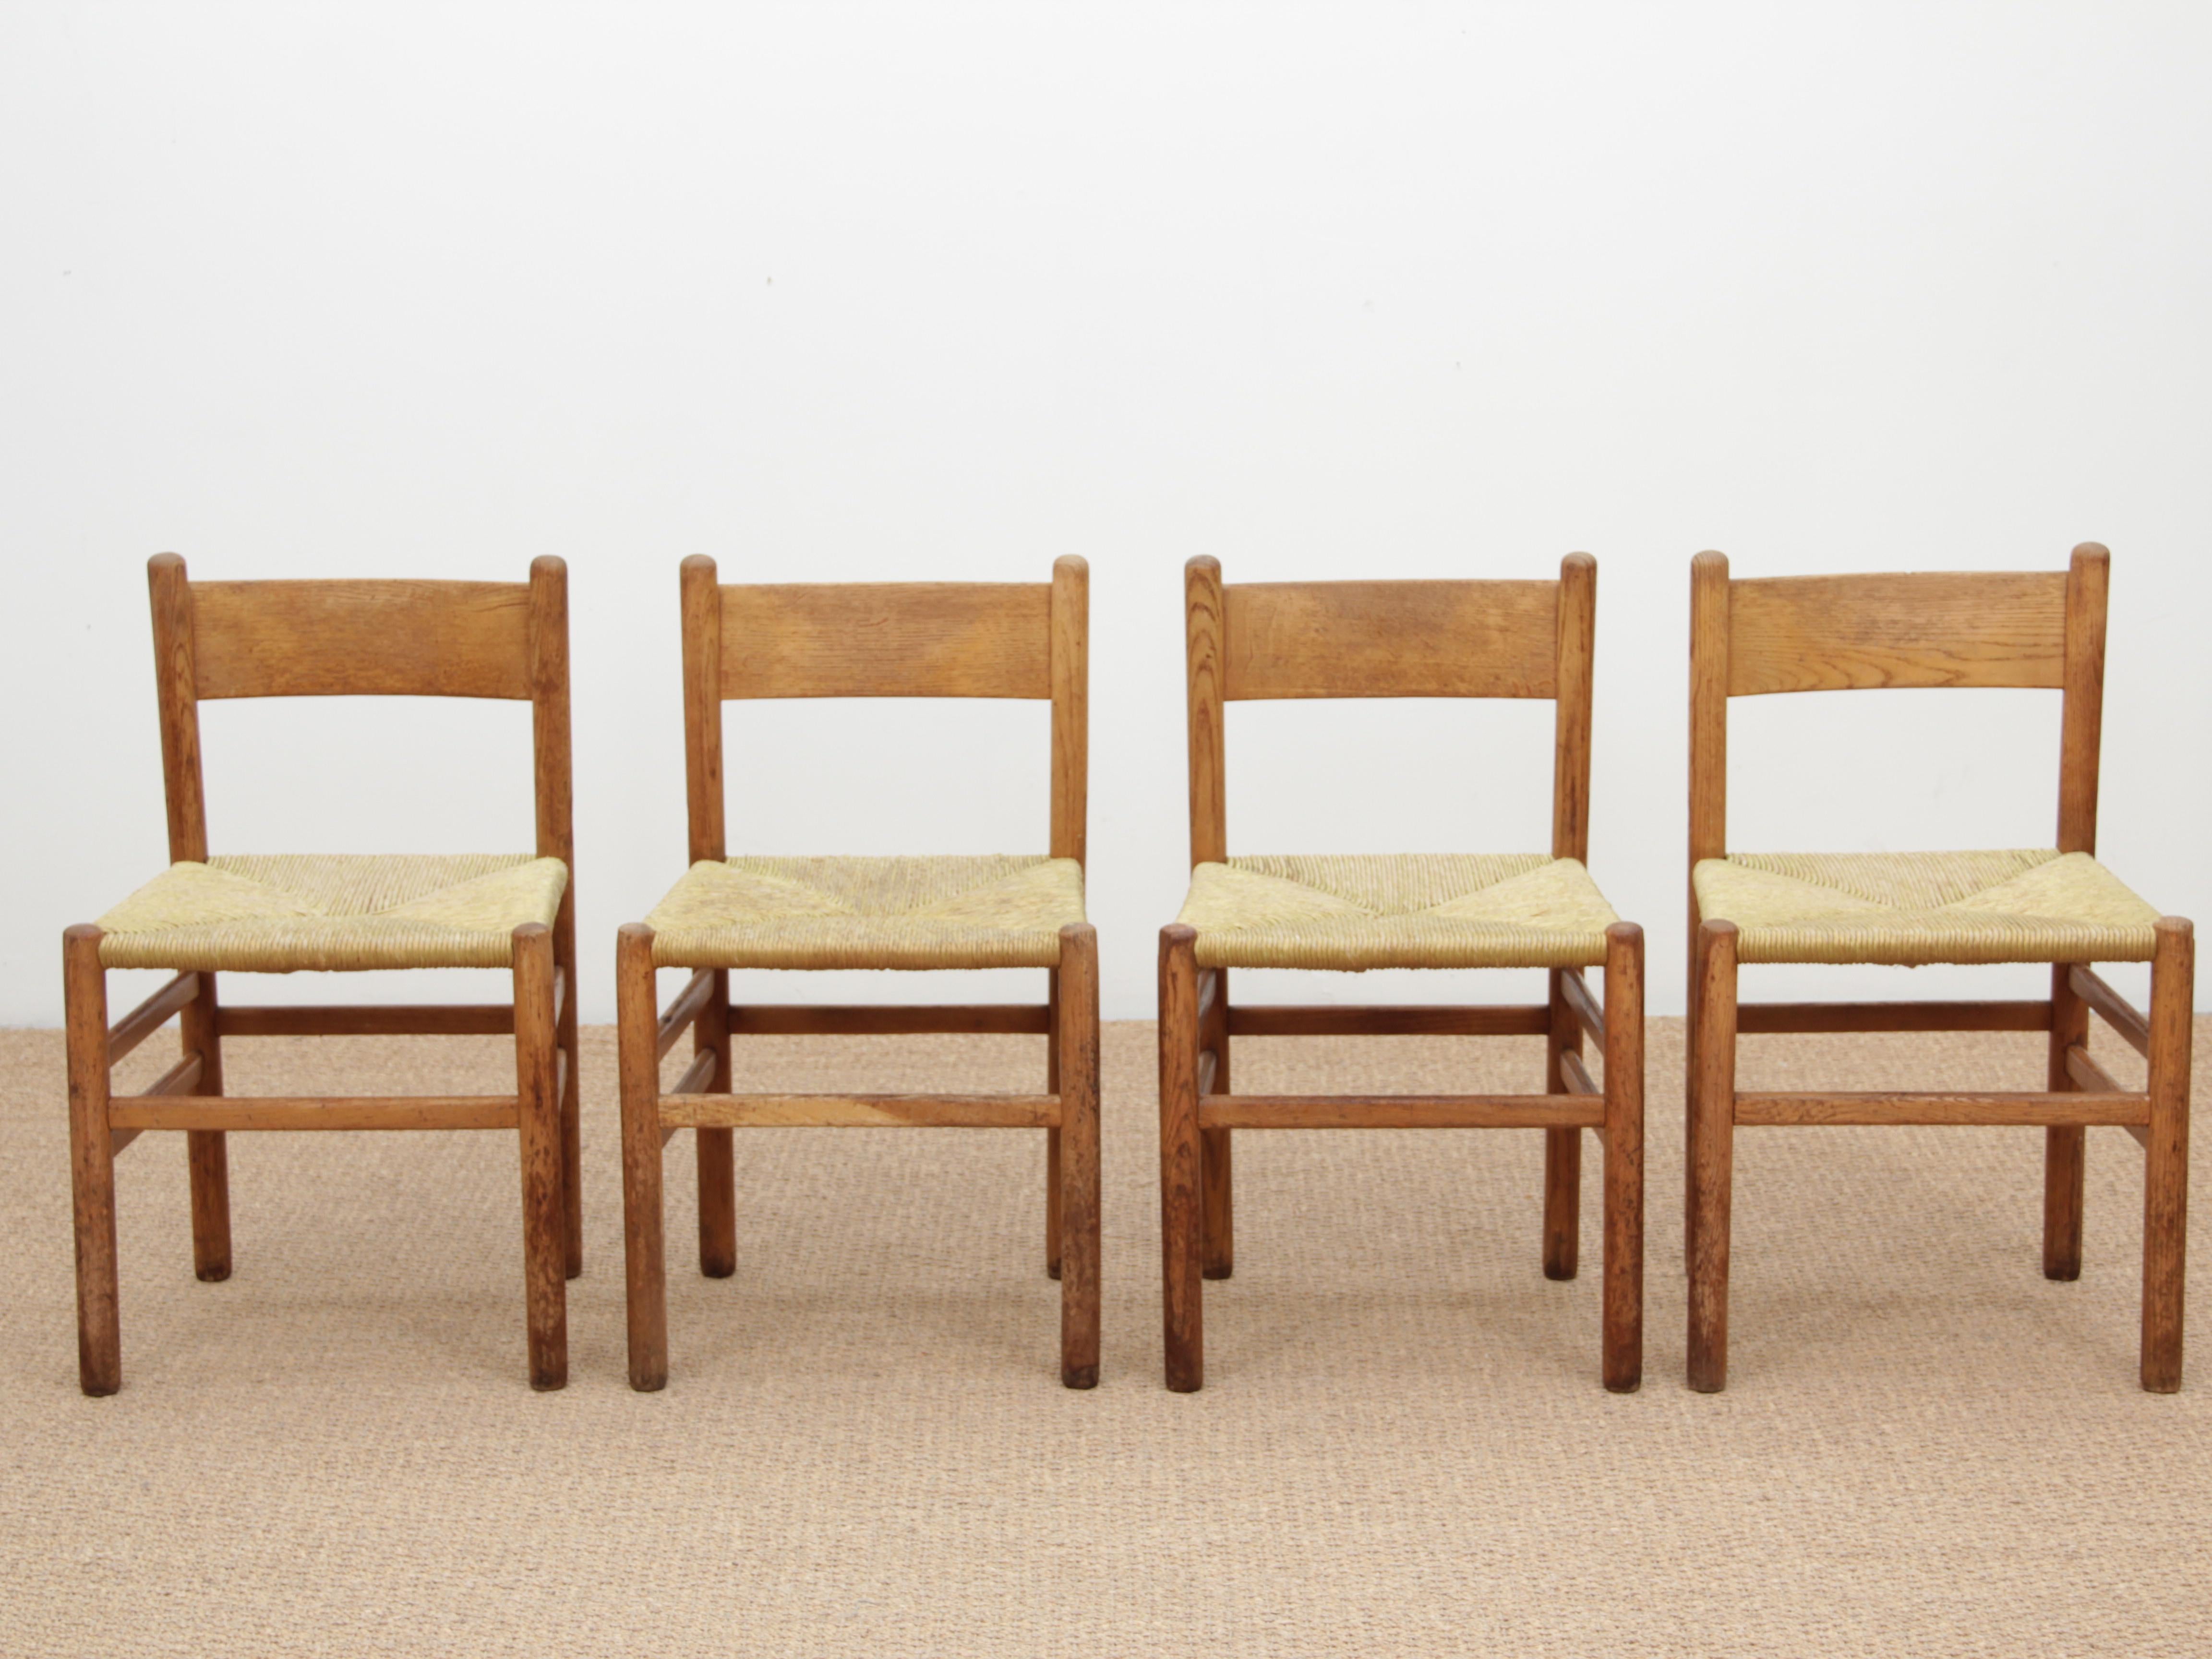 Set of 8 oak and rush dining chairs by Johan van Heuvel for Ad Vorm, 1960s

Measures: W 47 cm, H 79 cm, D 42 cm. SH 44 cm.